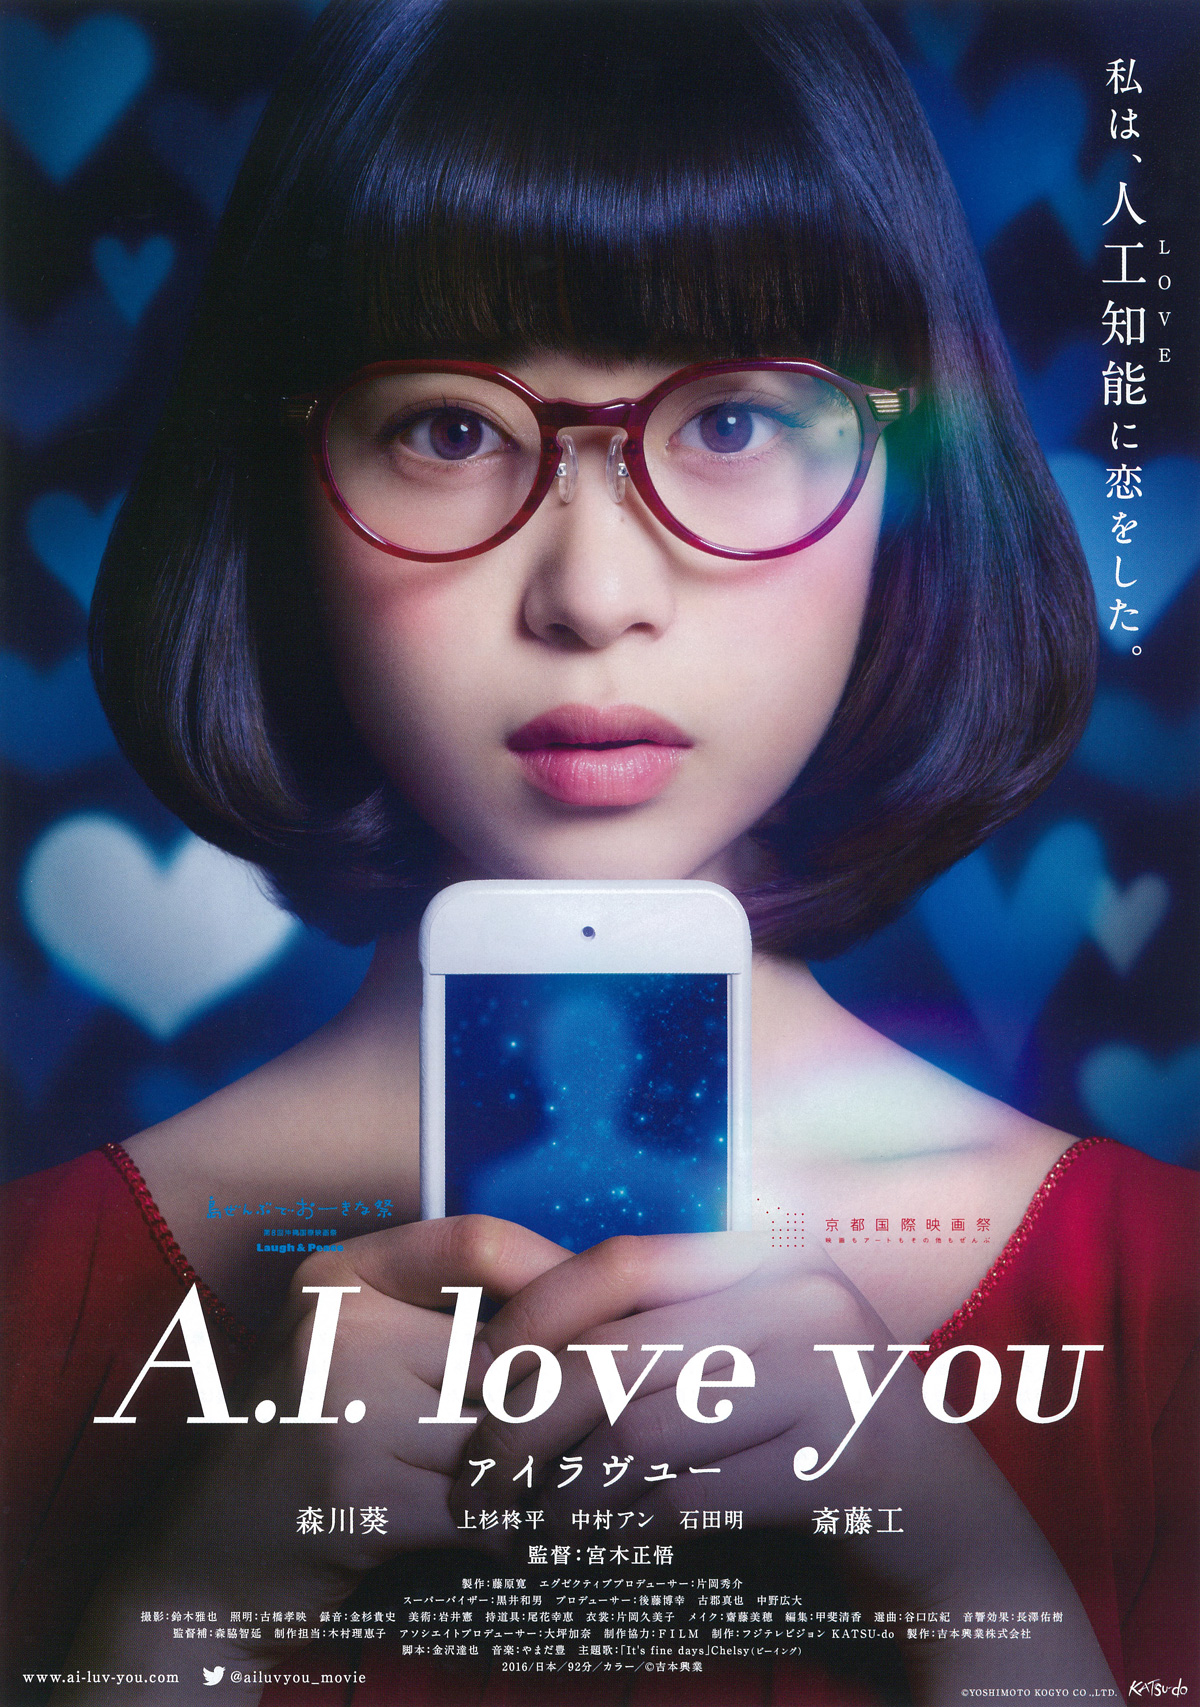 A.I. love you　アイラヴユーの画像